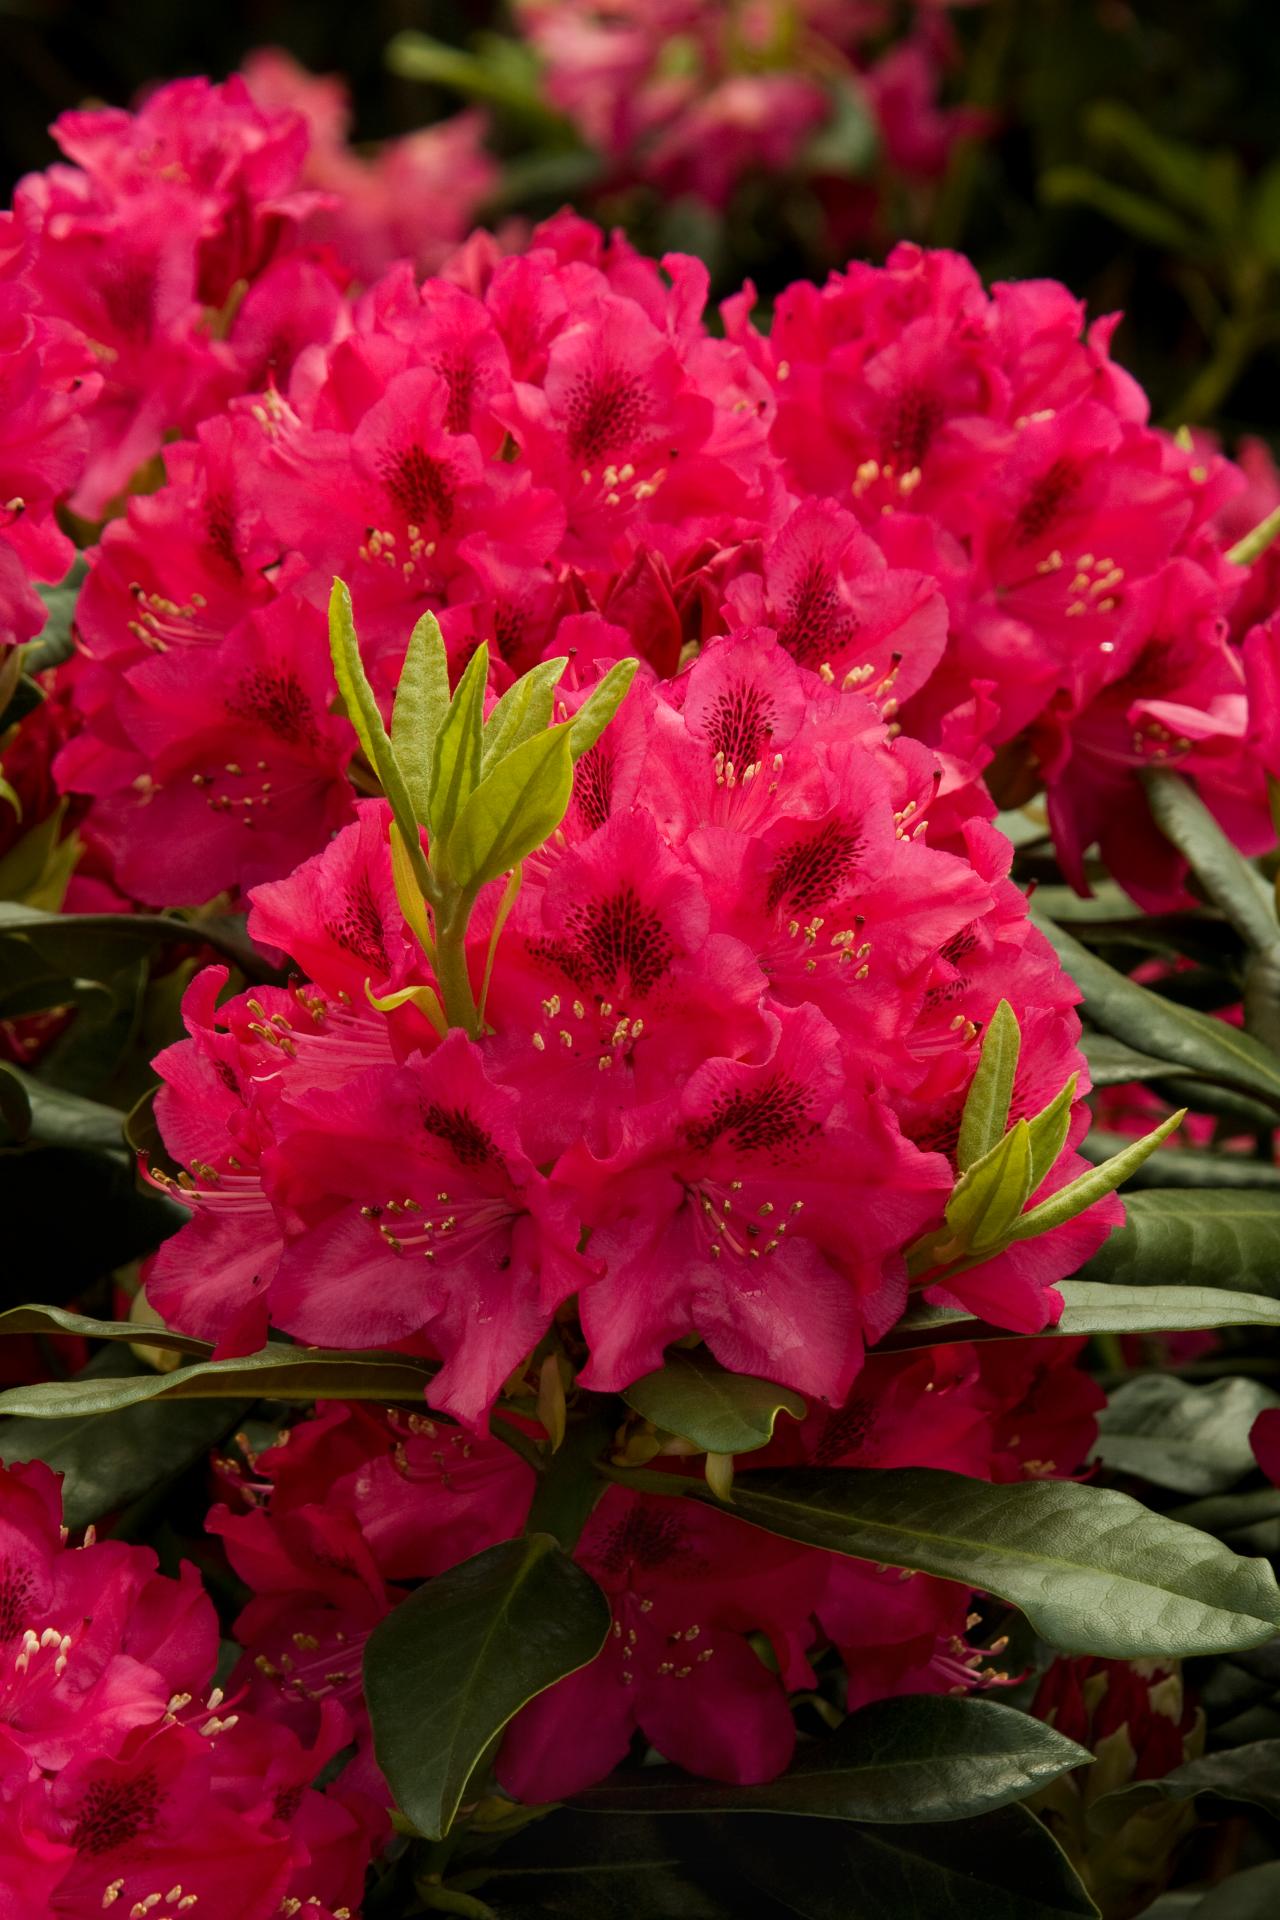 Rhododendron How to Plant, Grow and Care for Rhododendron   HGTV